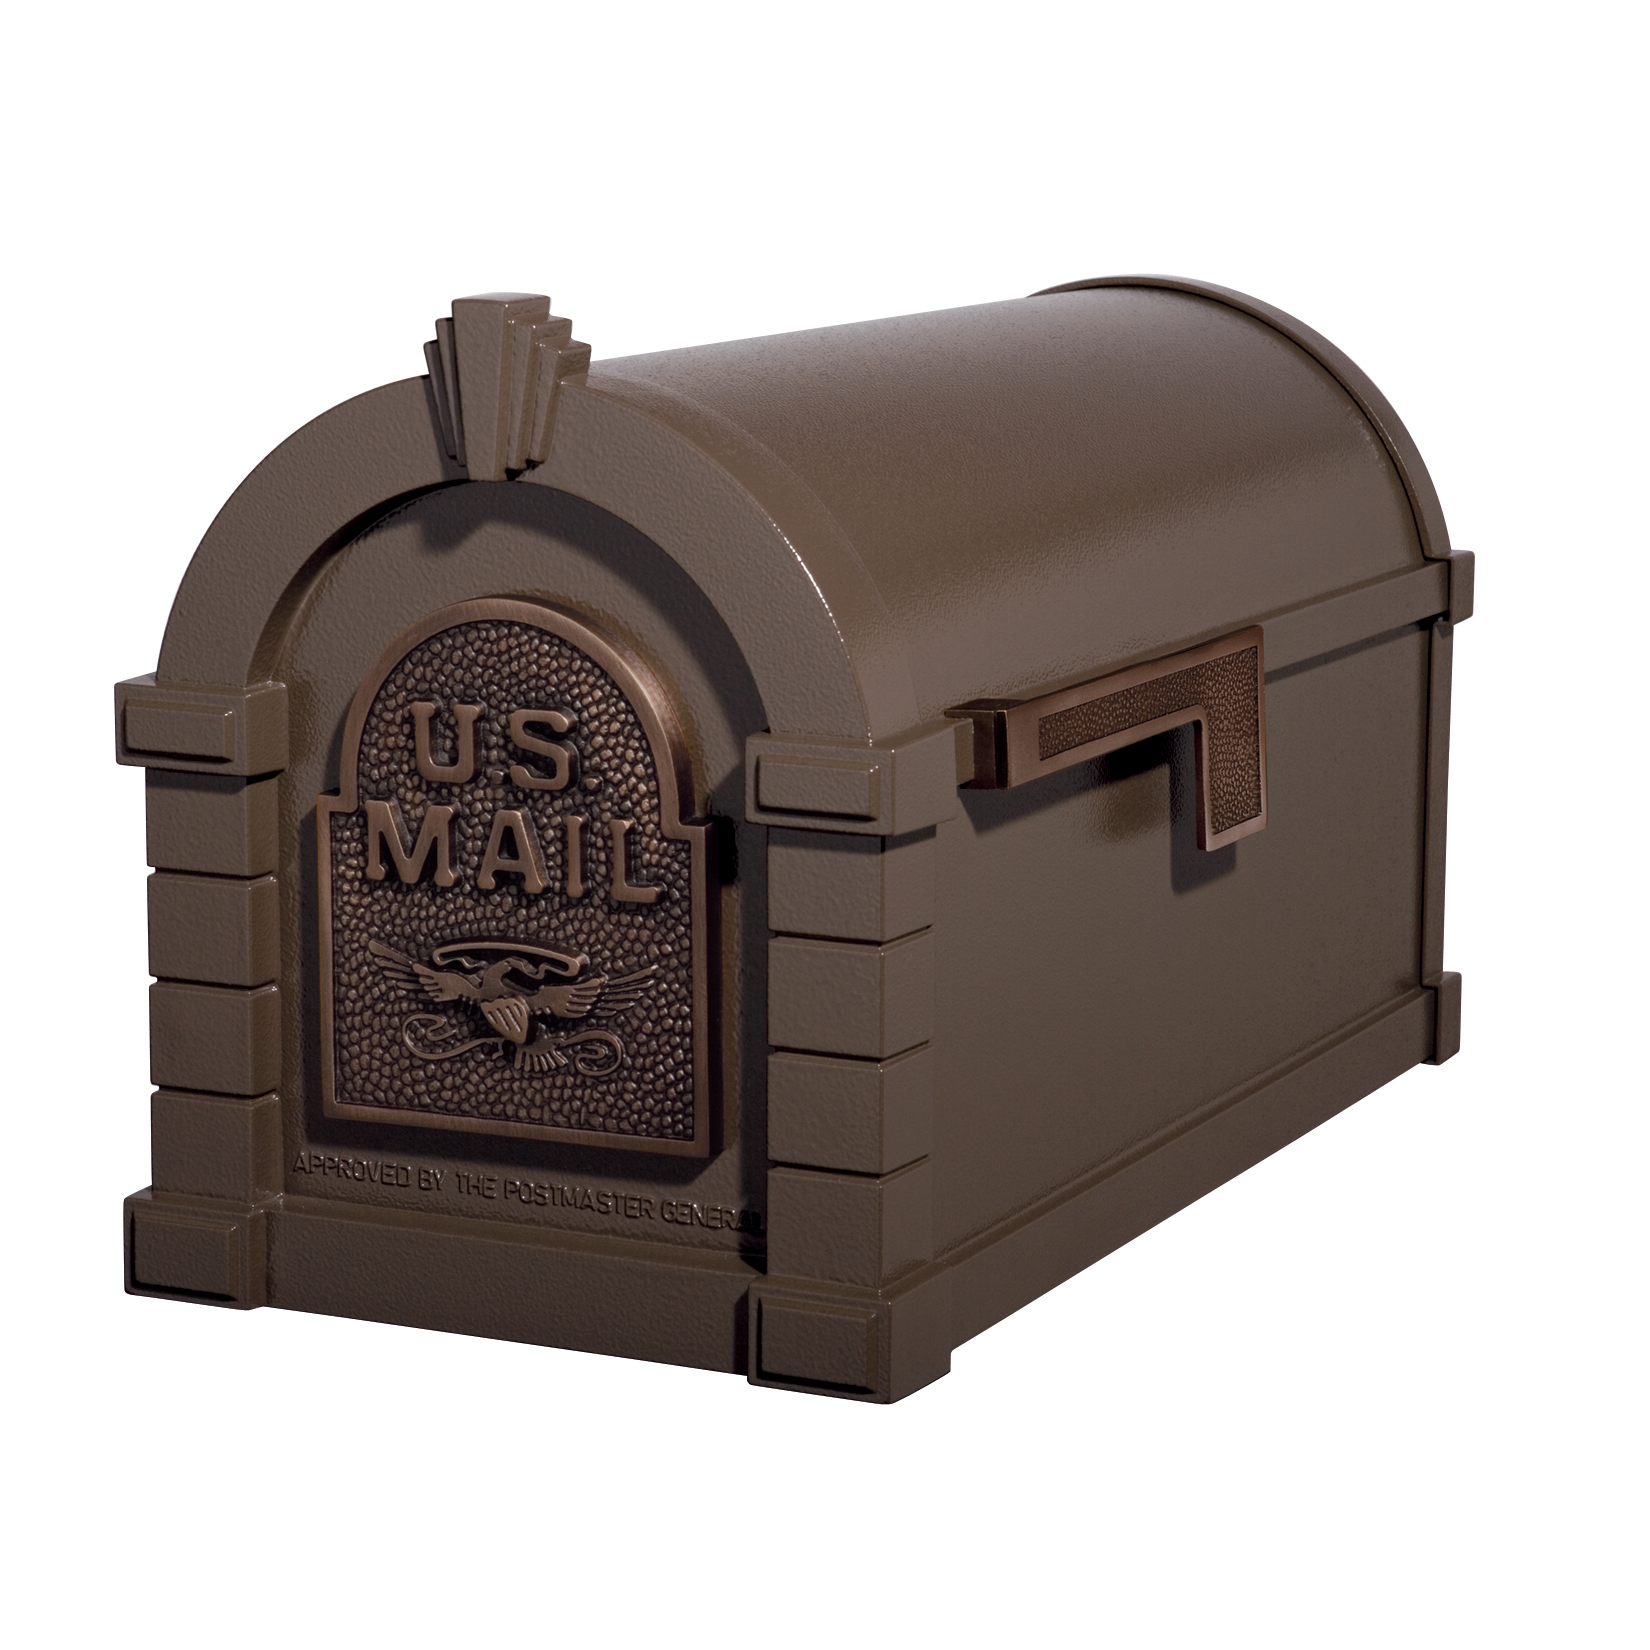 Gaines Eagle Keystone Mailboxes<br >Bronze with Antique Bronze